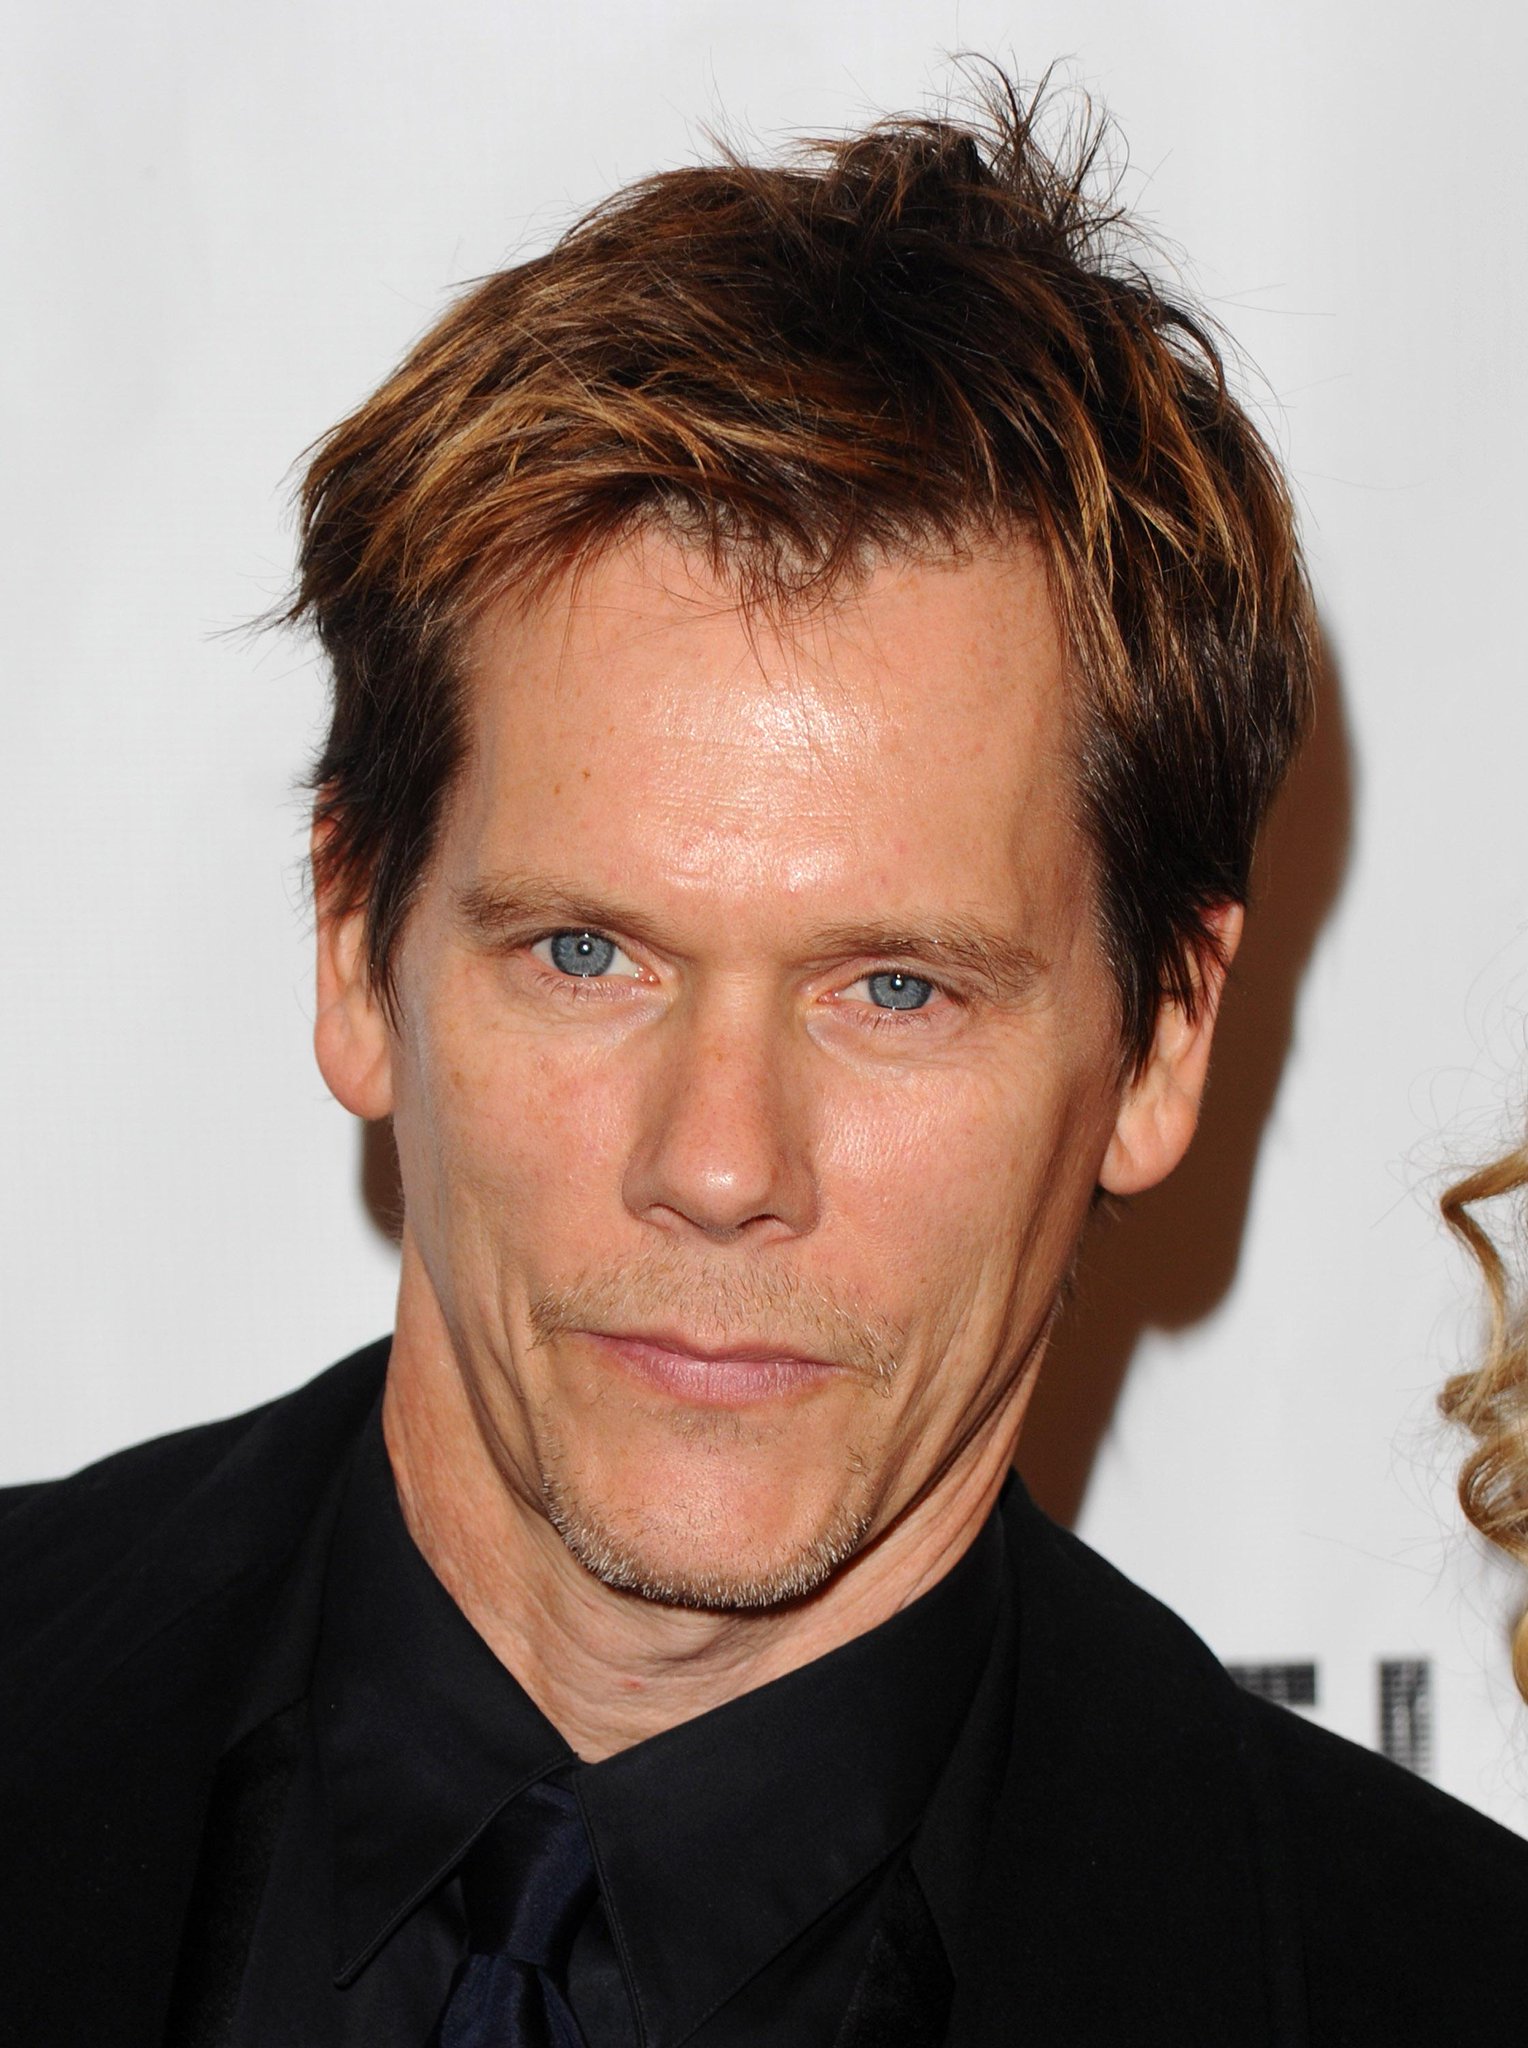 Happy birthday, Kevin Bacon! How many degrees of separation are YOU away from him? 